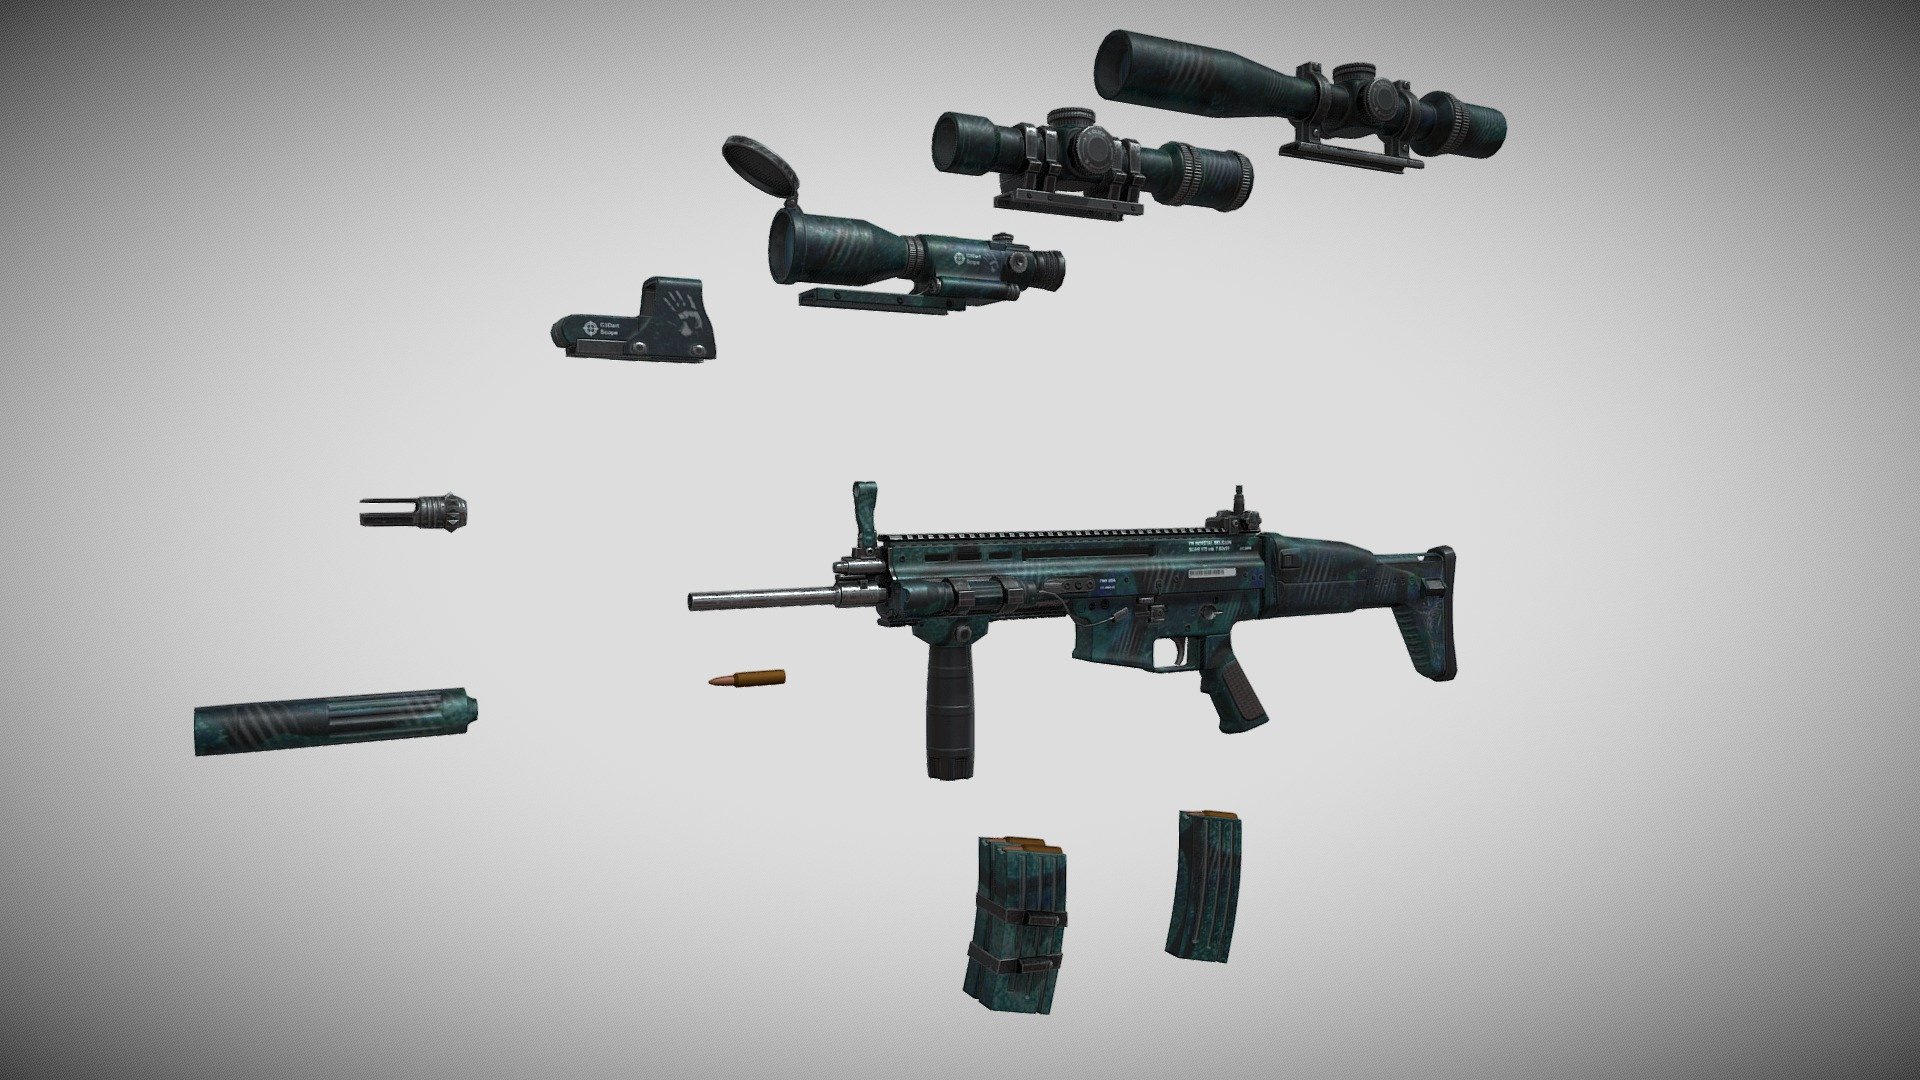 Main color: https://sketchfab.com/3d-models/scar-fn-lowpoly-main-color-7a48ab4054e44b568272ebcaff881231 Dragon skin: https://skfb.ly/6TsBQ Fire skin: https://skfb.ly/6TsDO Pirate skin: Winter skin: https://skfb.ly/6TsHw

Game Ready Scar FN mesh this package comes with: Weapon and 5 Scopes - Holographic sight - 4x scope - 8x scope - 16x scope - sight 1 Muzzle 1 Silencer 1 Flashlight 1 Grip 2 Magazines(single and double)

Textures: BaseColor Roughness Height Normal AO Metallic

All textures 4096 x 4096

Next gen model 3d model